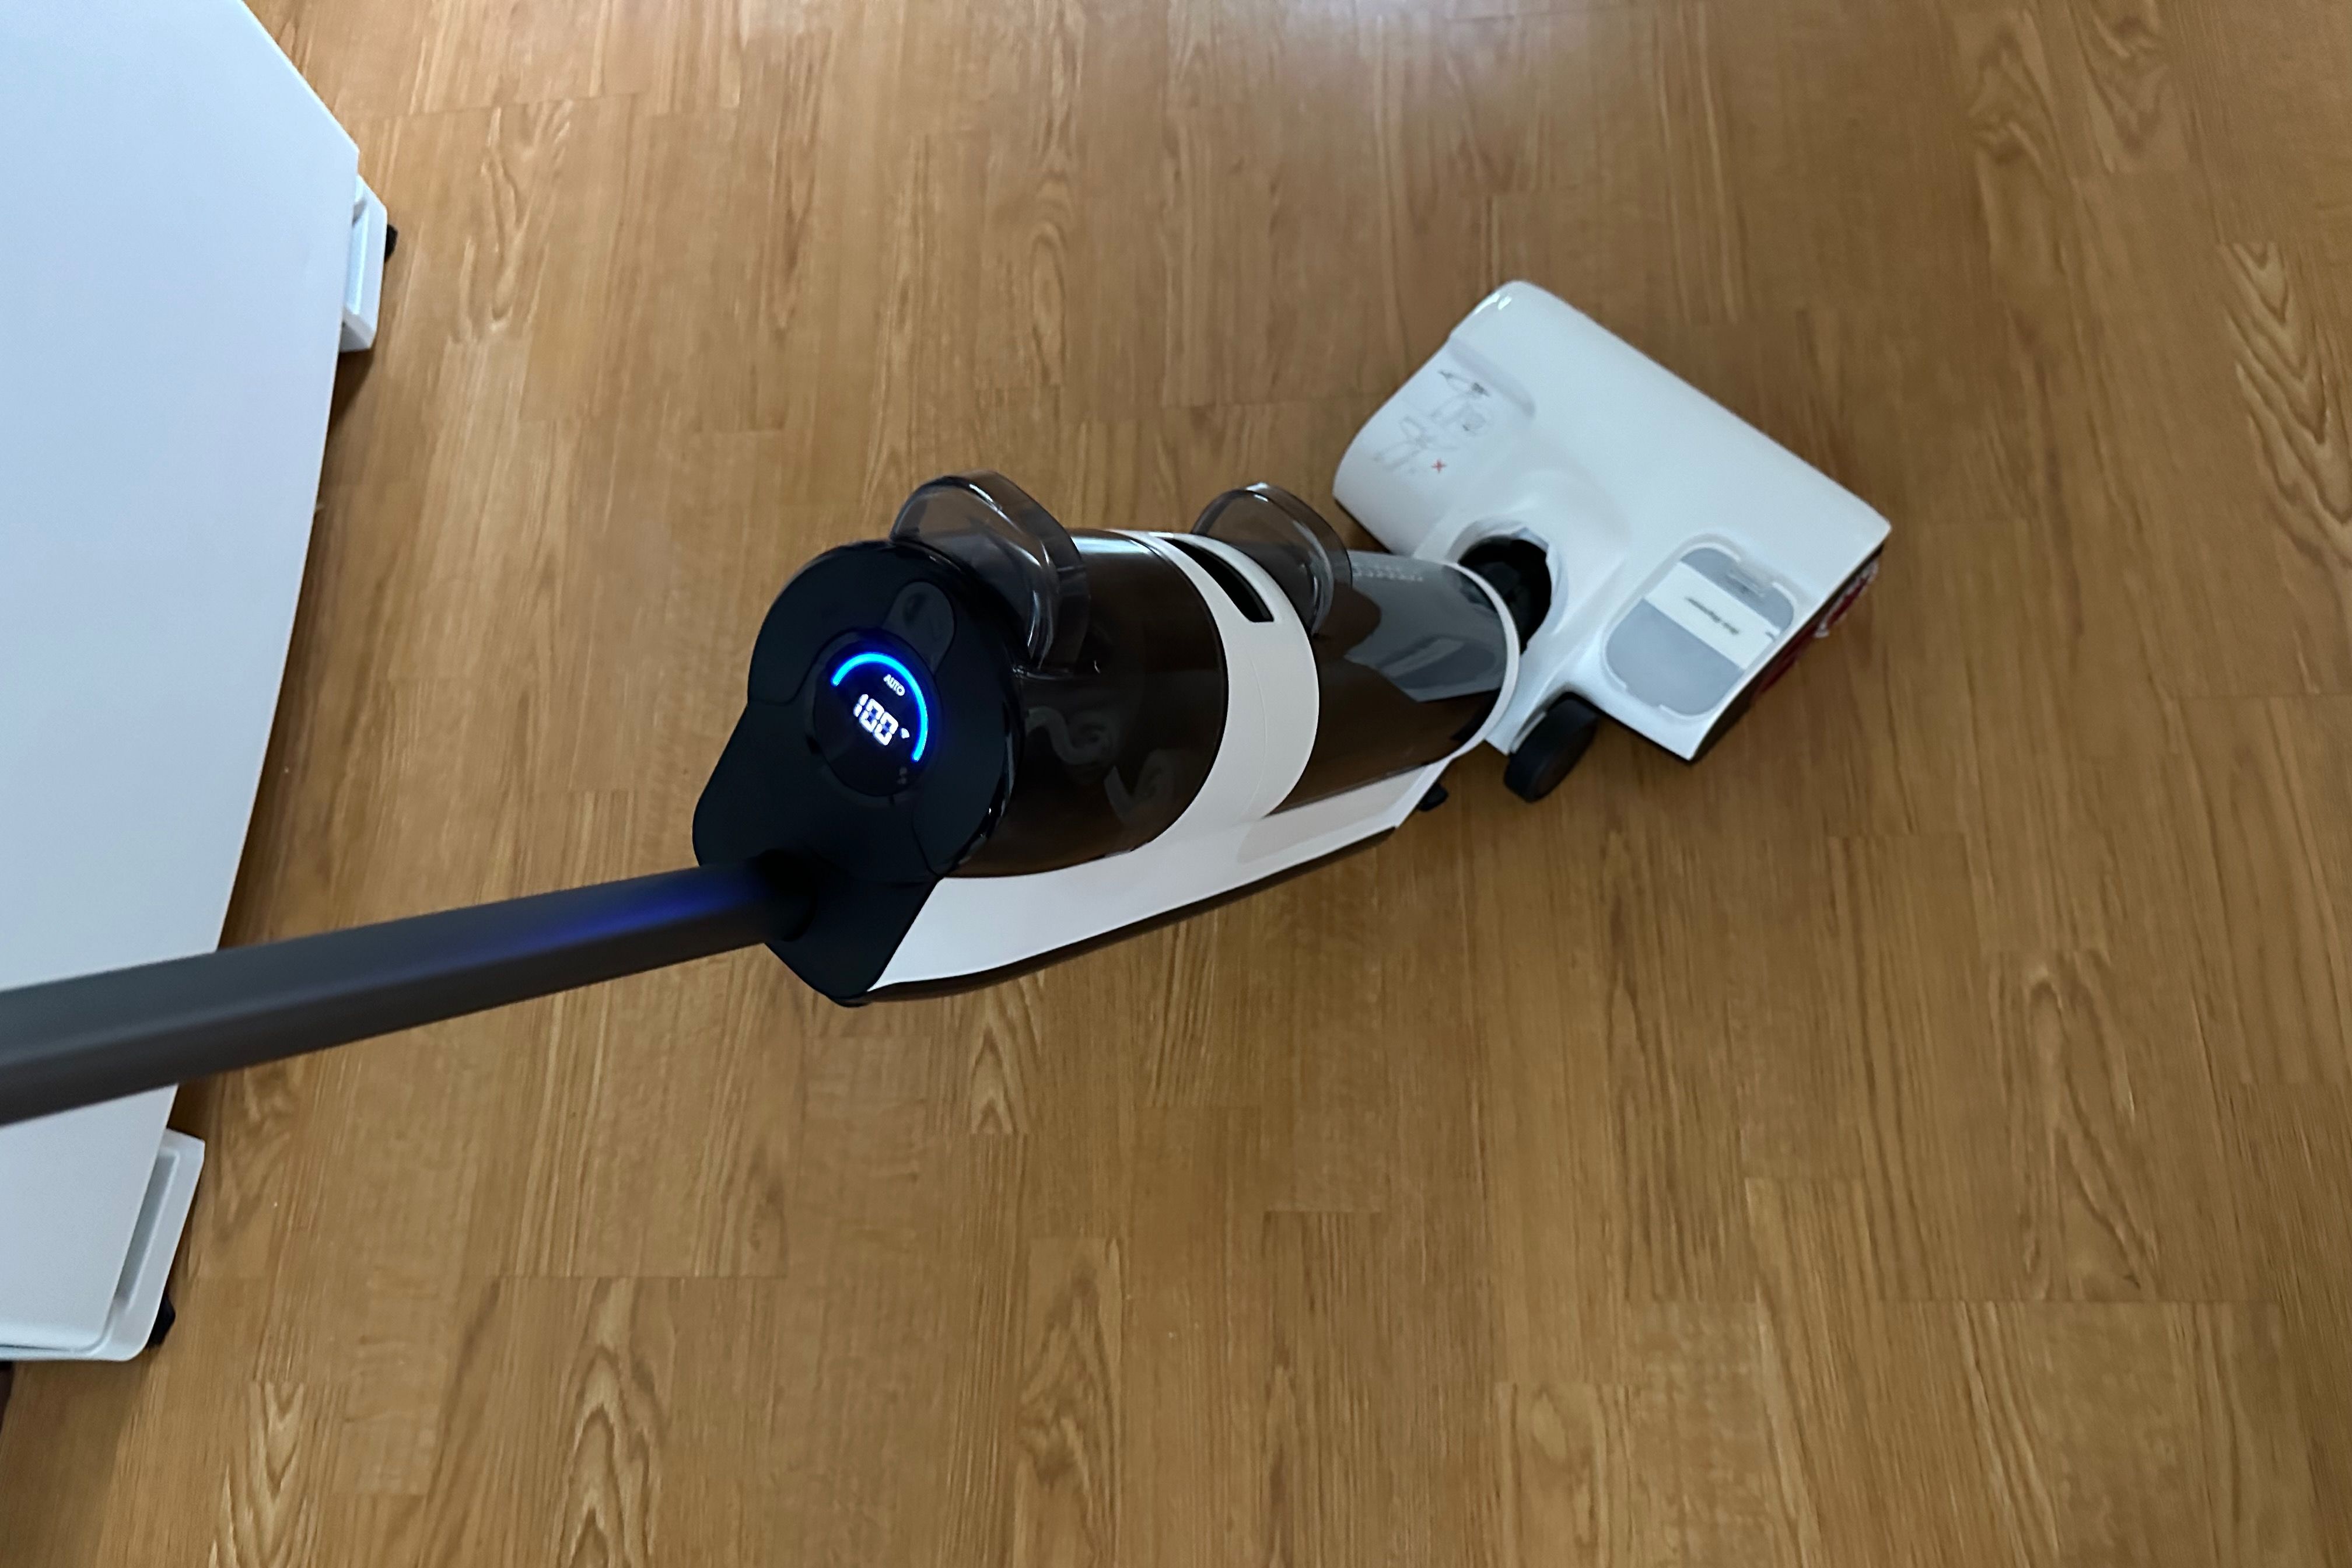 Showing a Roborock Dyad Pro in operation on a hardwood floor